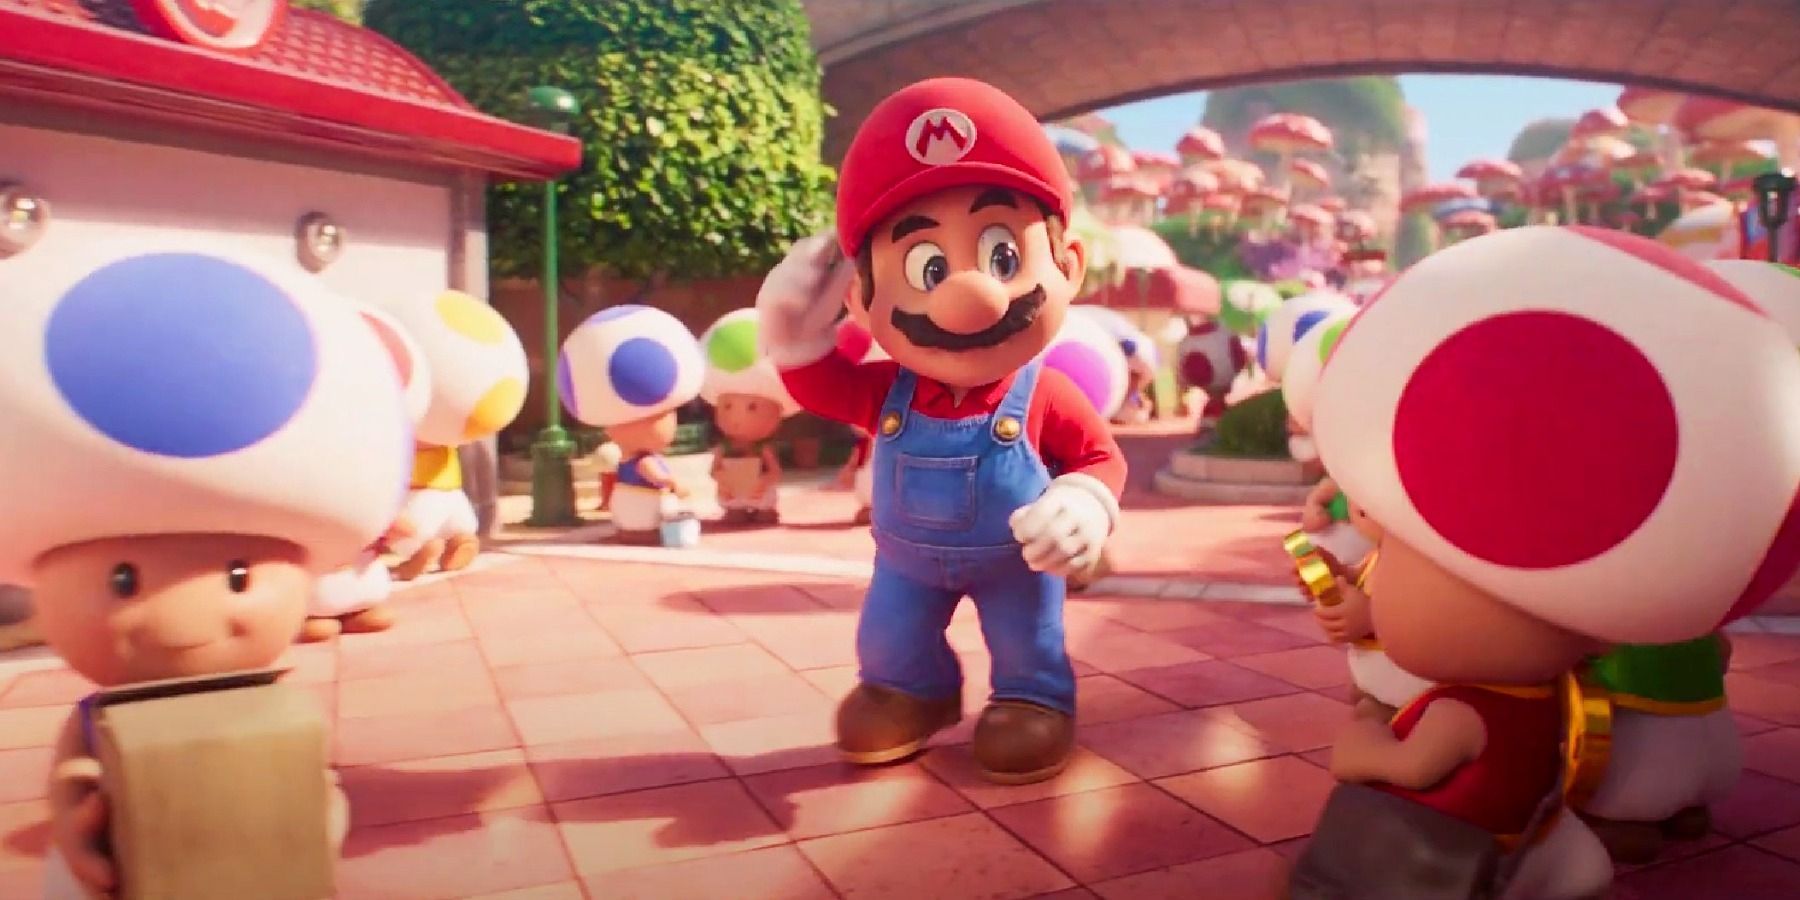 This Game Turns Super Mario Into a First-Person Shooter